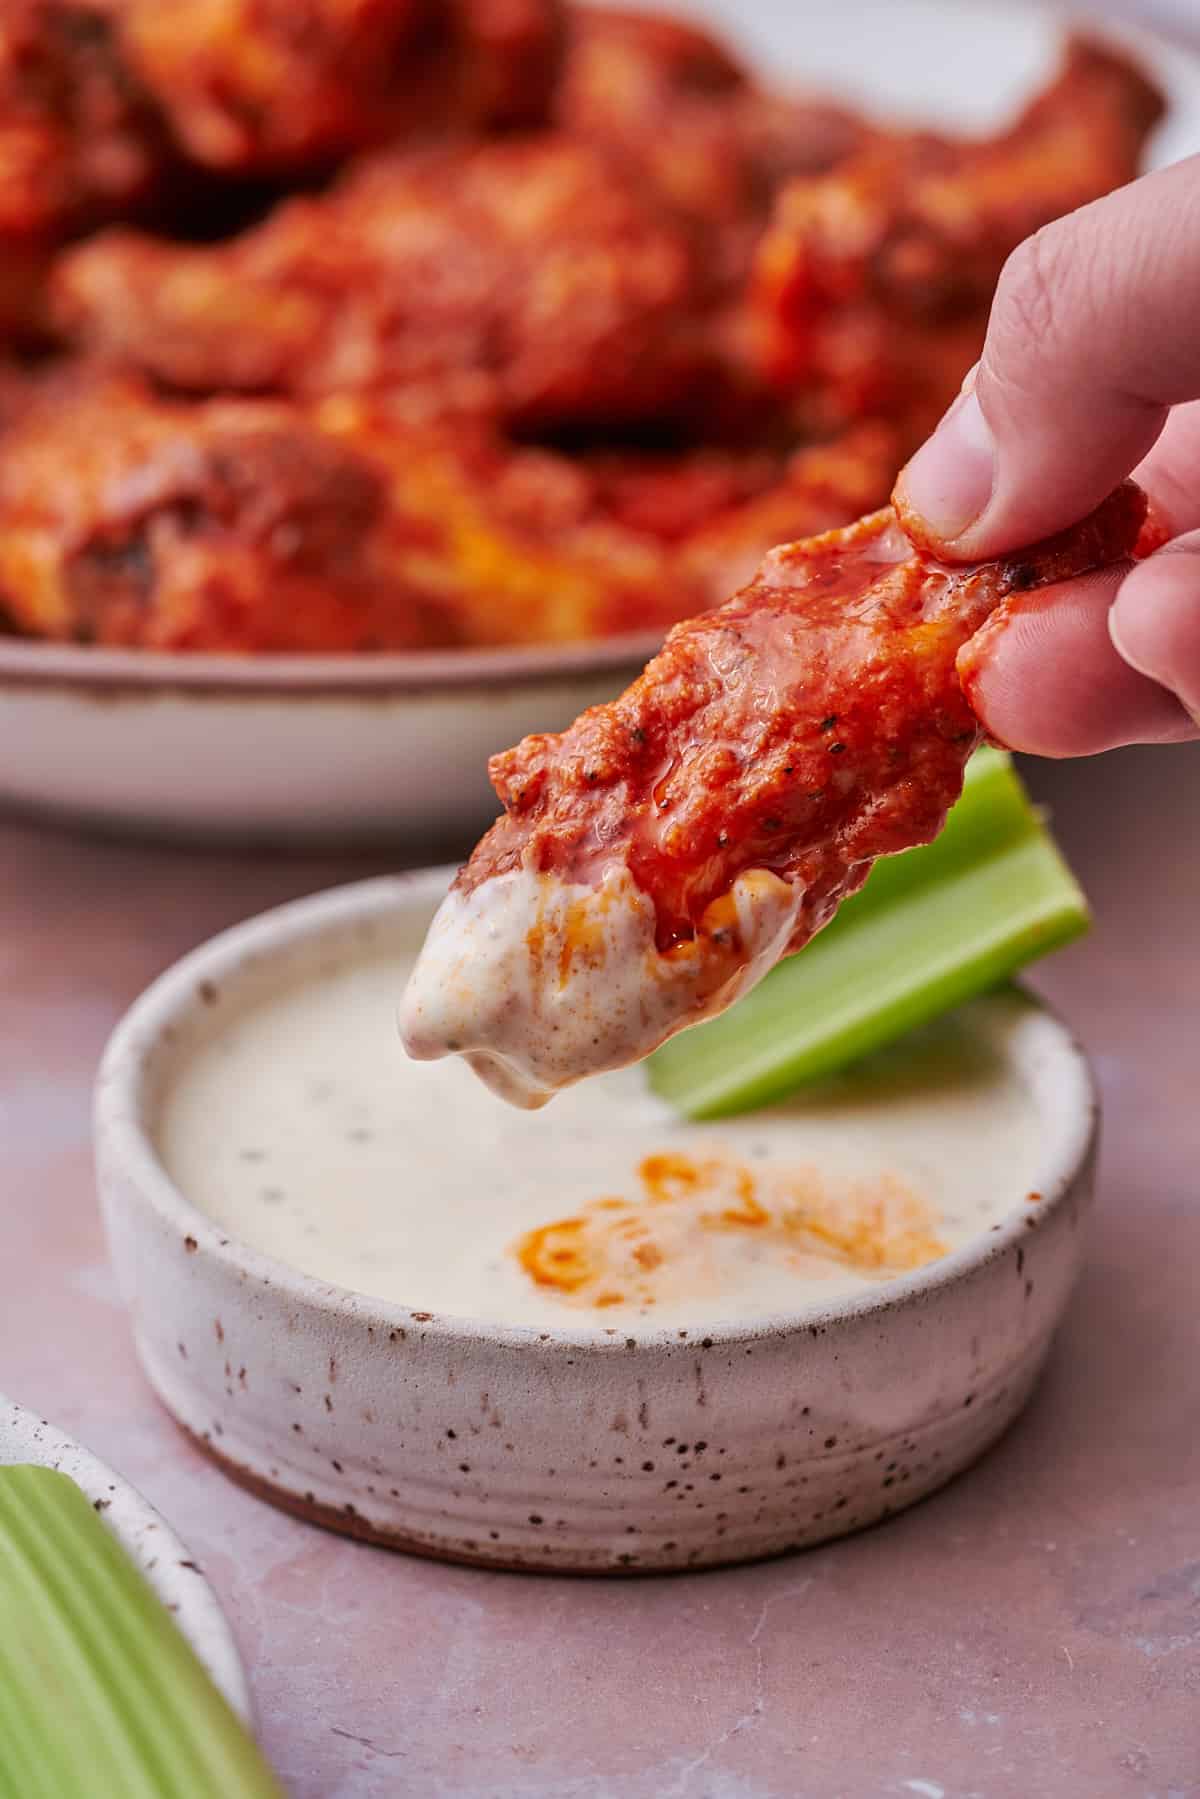 Buffalo wing being dipped in ranch, with celery stick on the side.